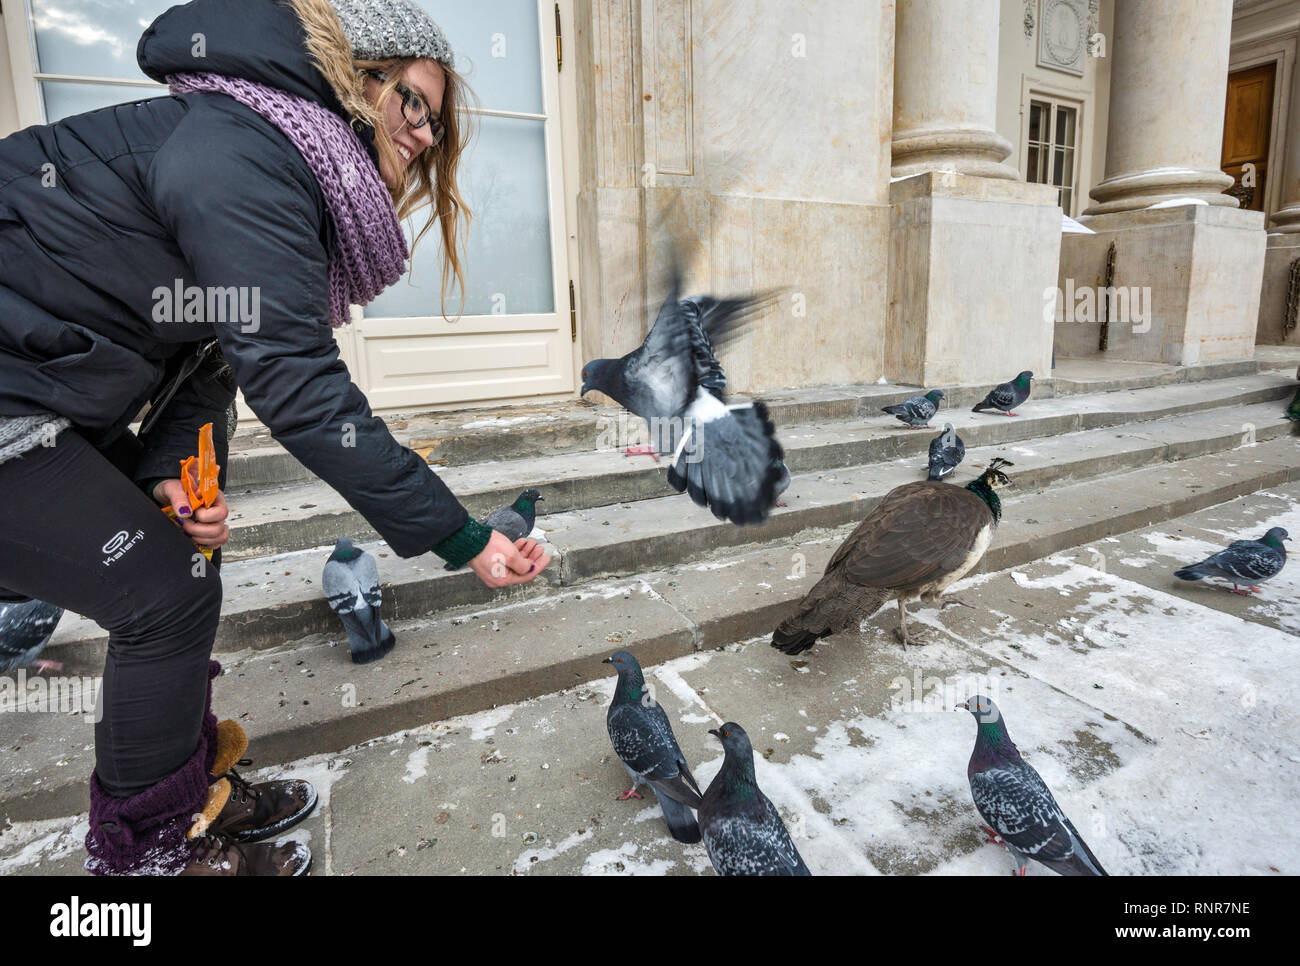 Young woman feeding a pigeon at Lazienki Palace in Warsaw, Poland Stock Photo